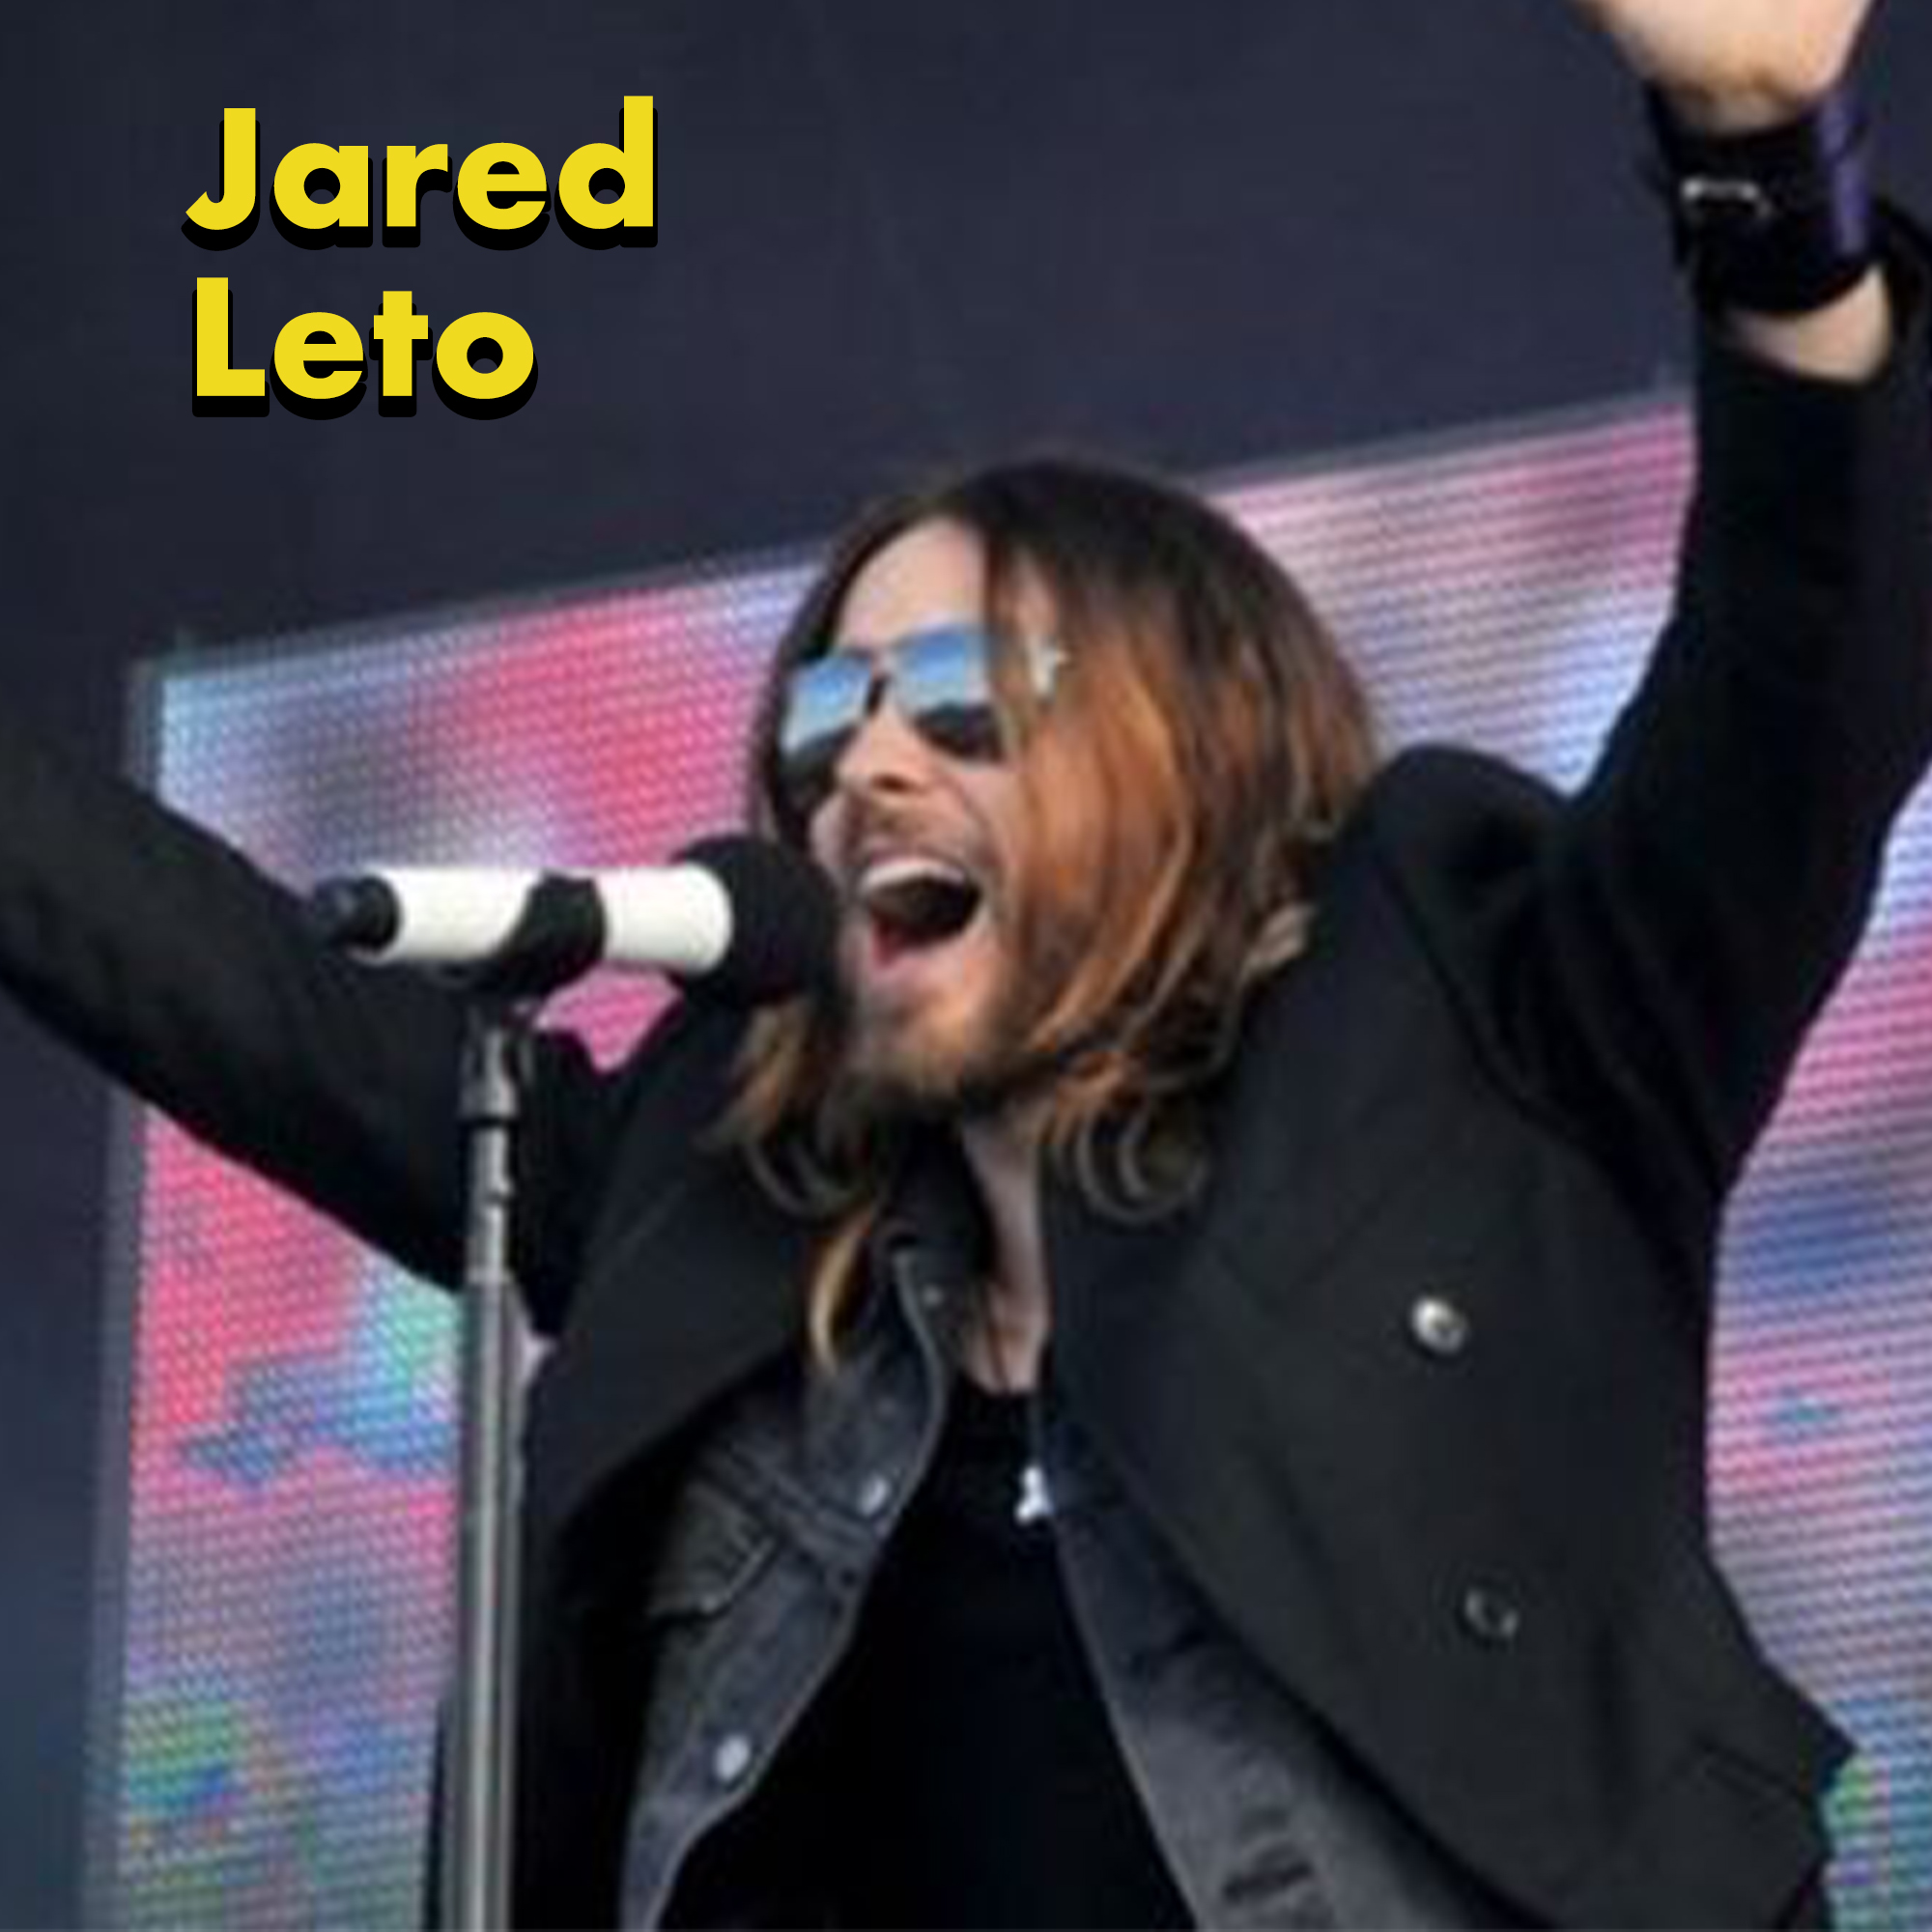 actors in bands - music artist - Jared Leto